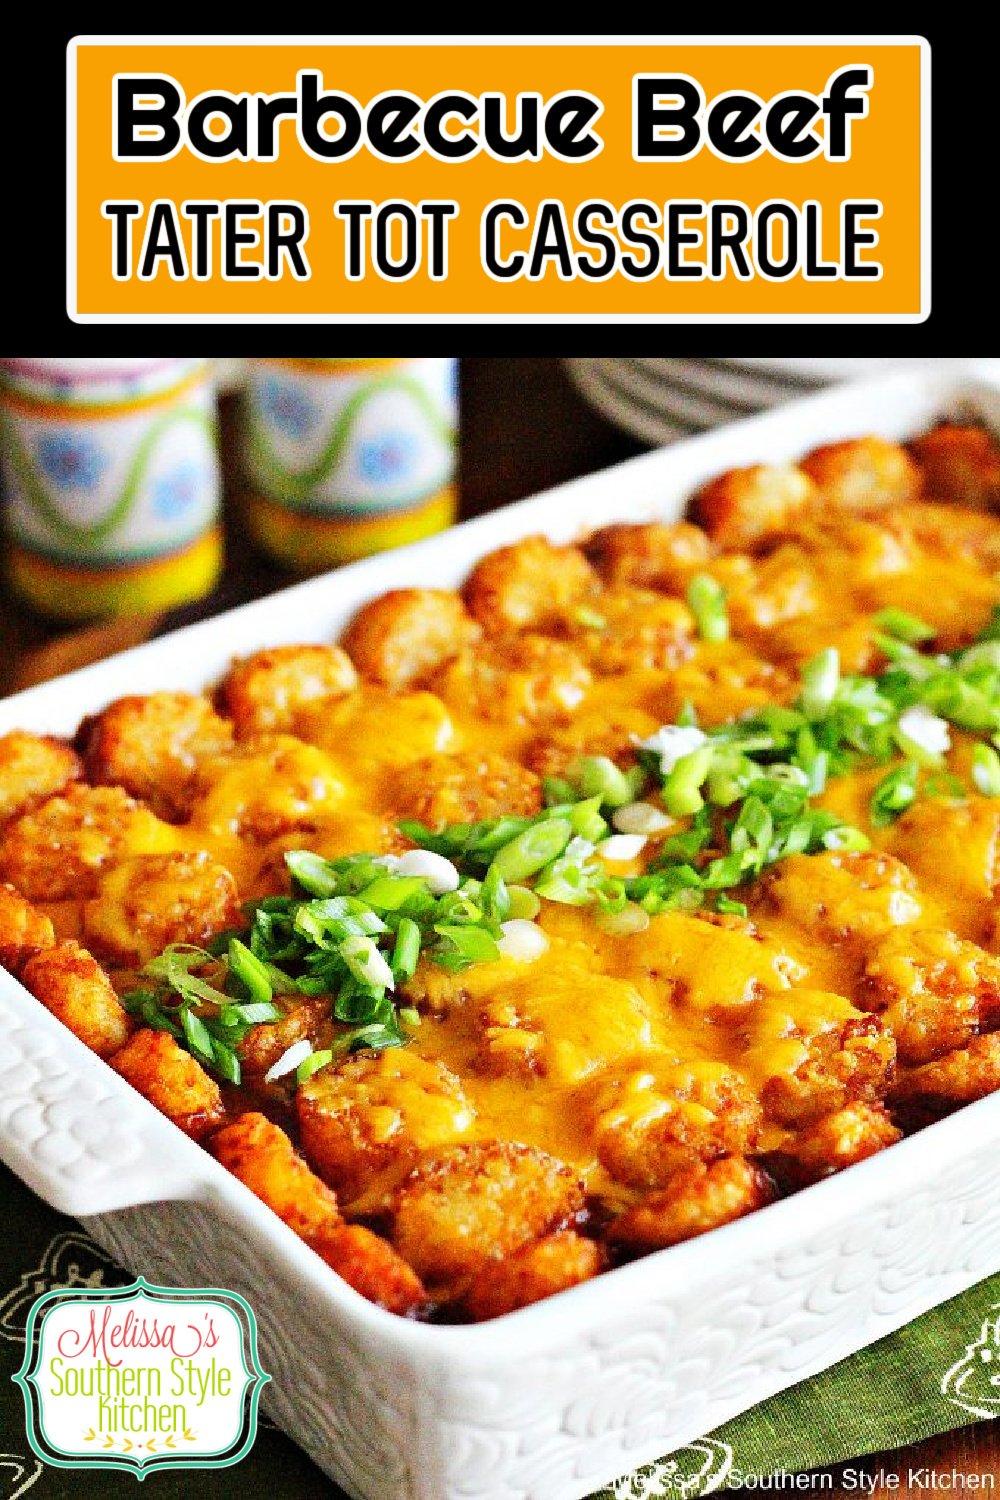 Barbecue Beef Tater Tot Casserole is a hearty one dish meal #bbq #barbecuebeef #tatertotcasserole #dinnerideas #casserolerecipes #southernrecipes #southernfood #barbecue #easyrecipes via @melissasssk